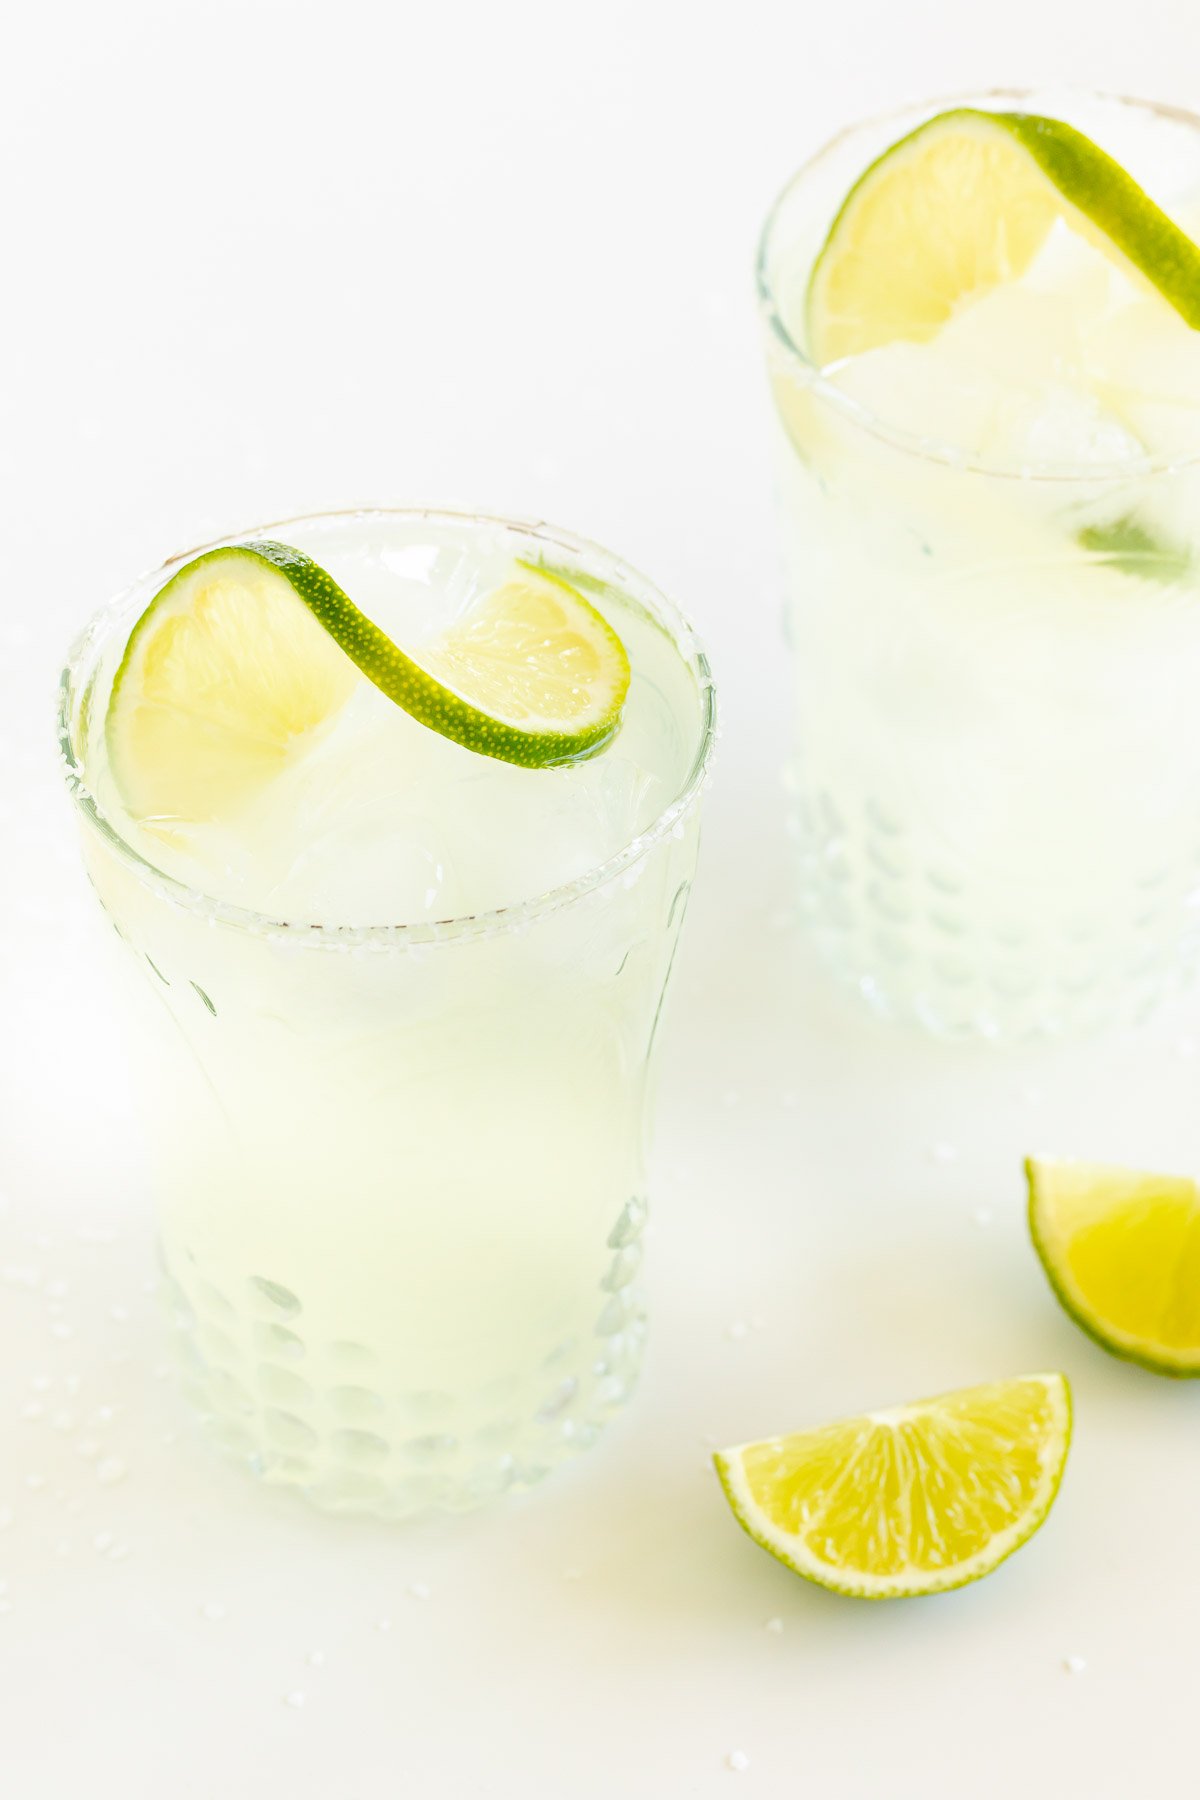 A homemade margarita recipe served up in clear glasses with limes